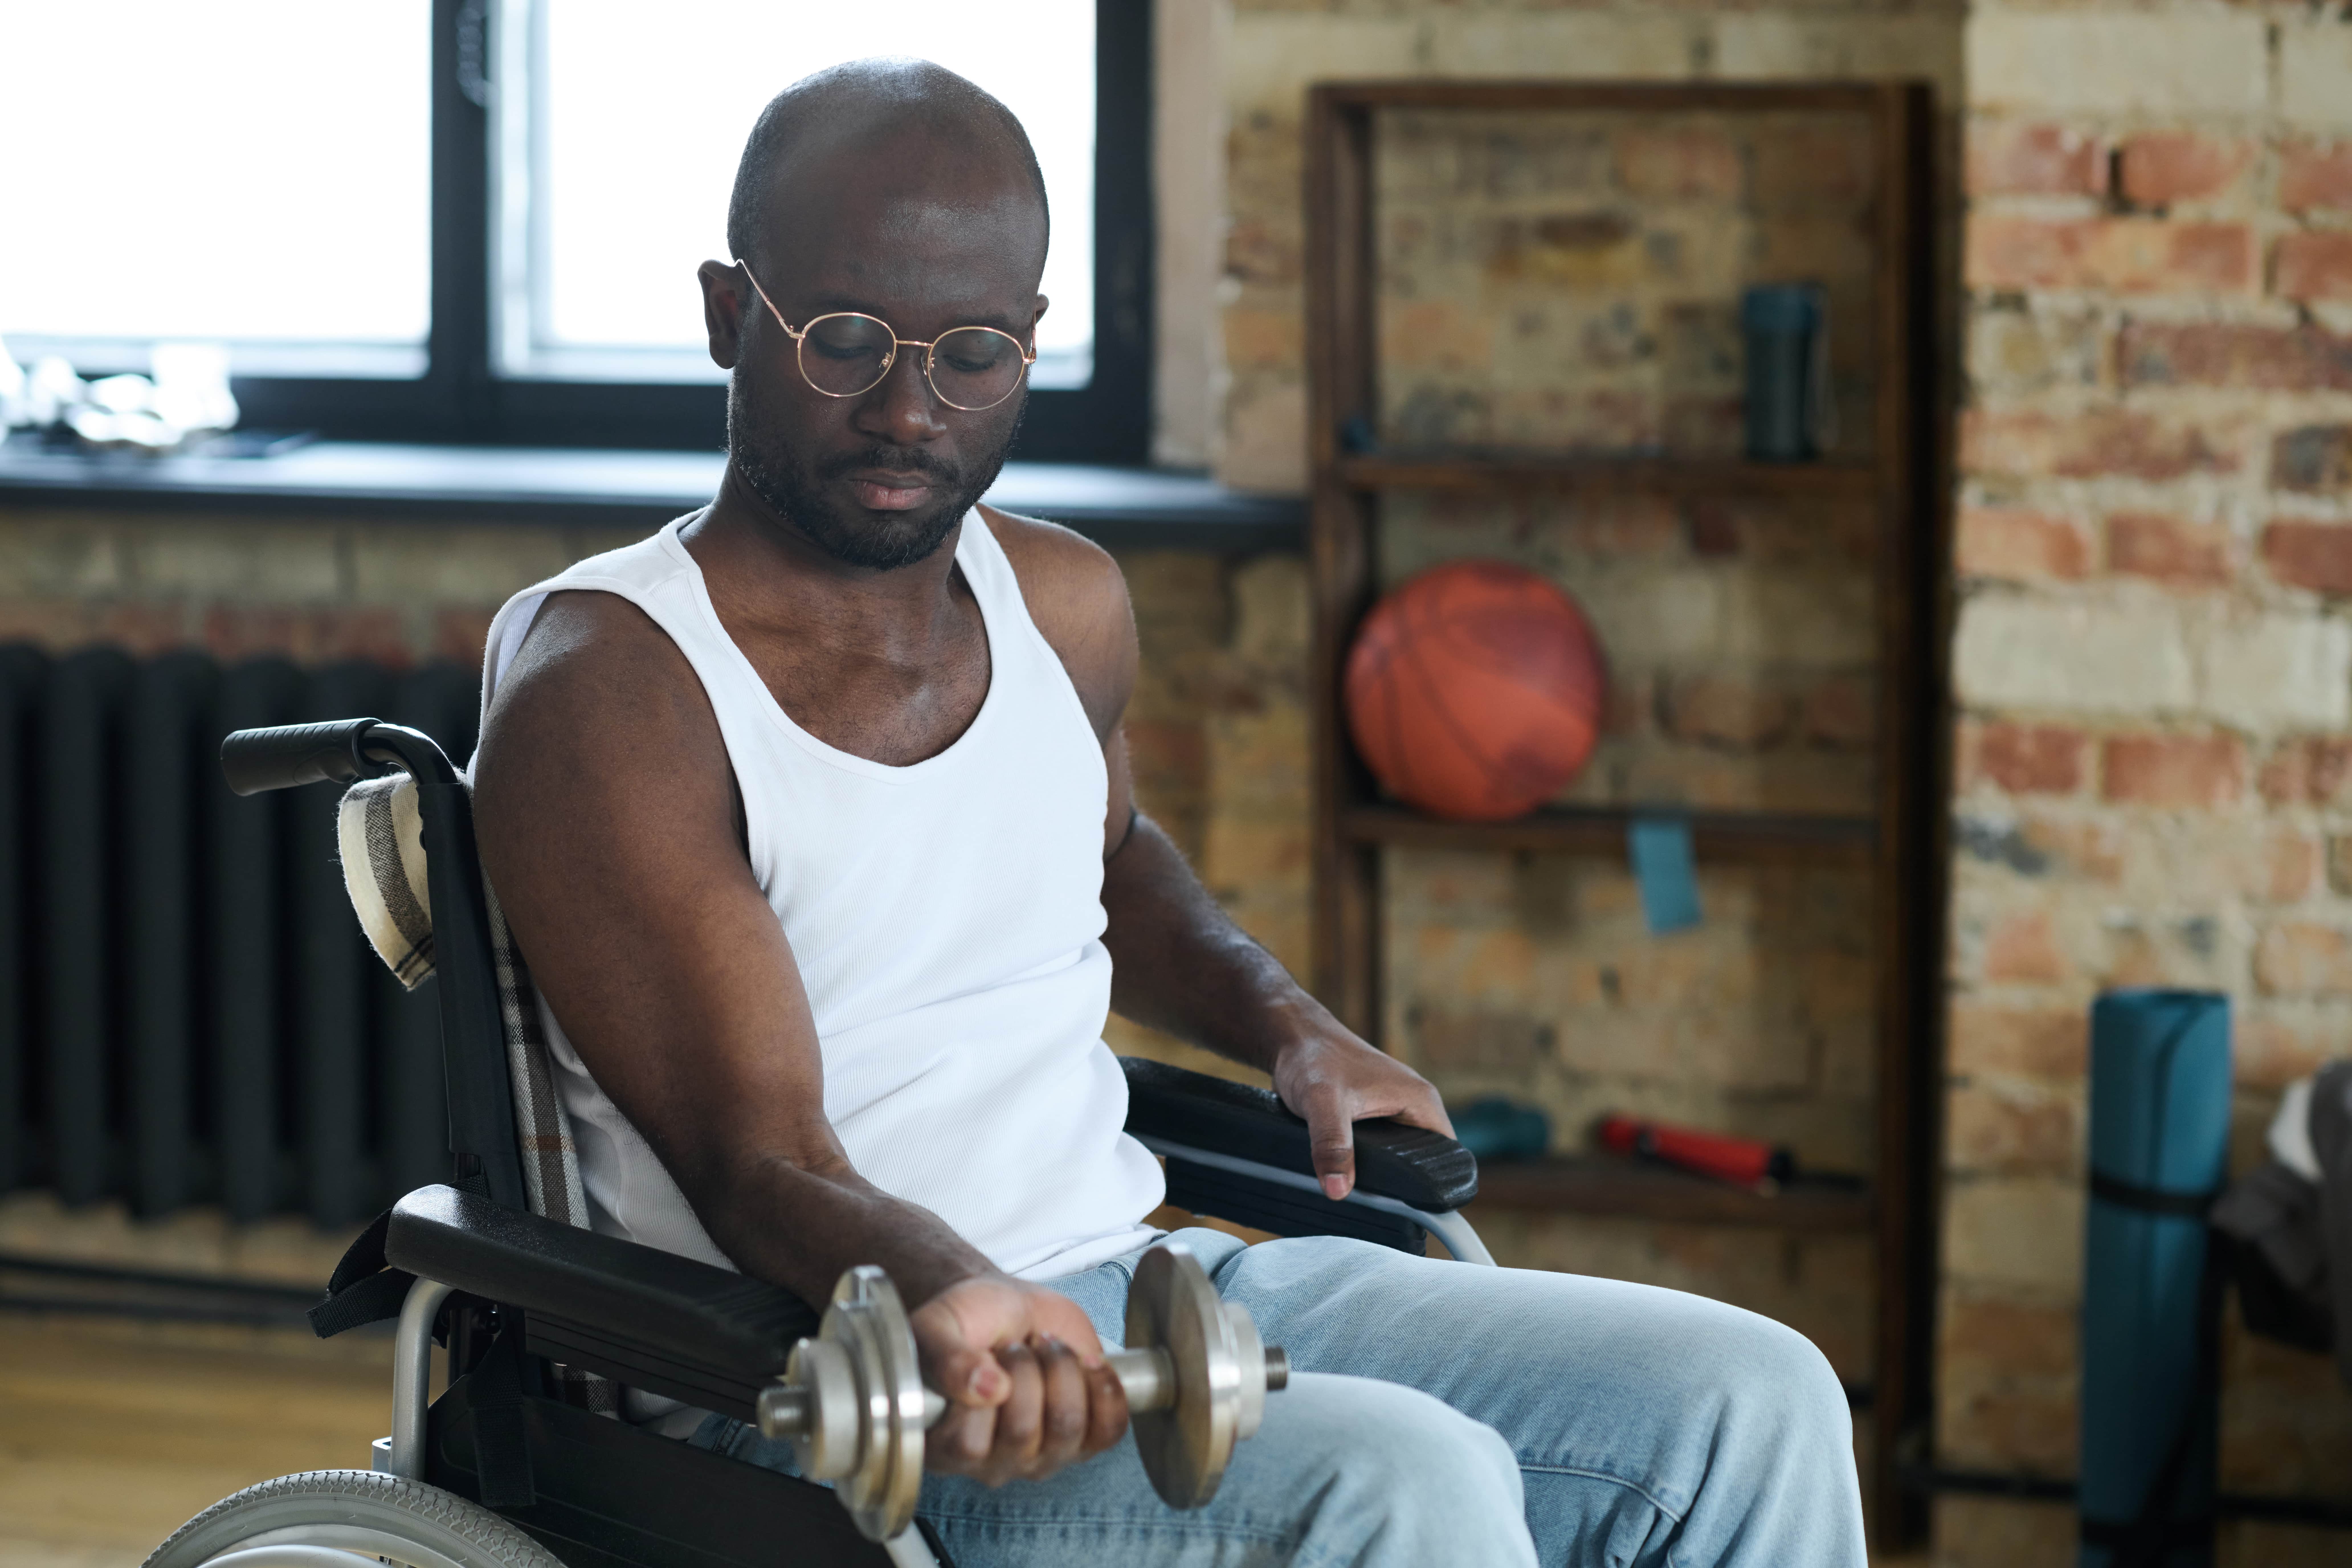 Man in wheelchair lifting weights